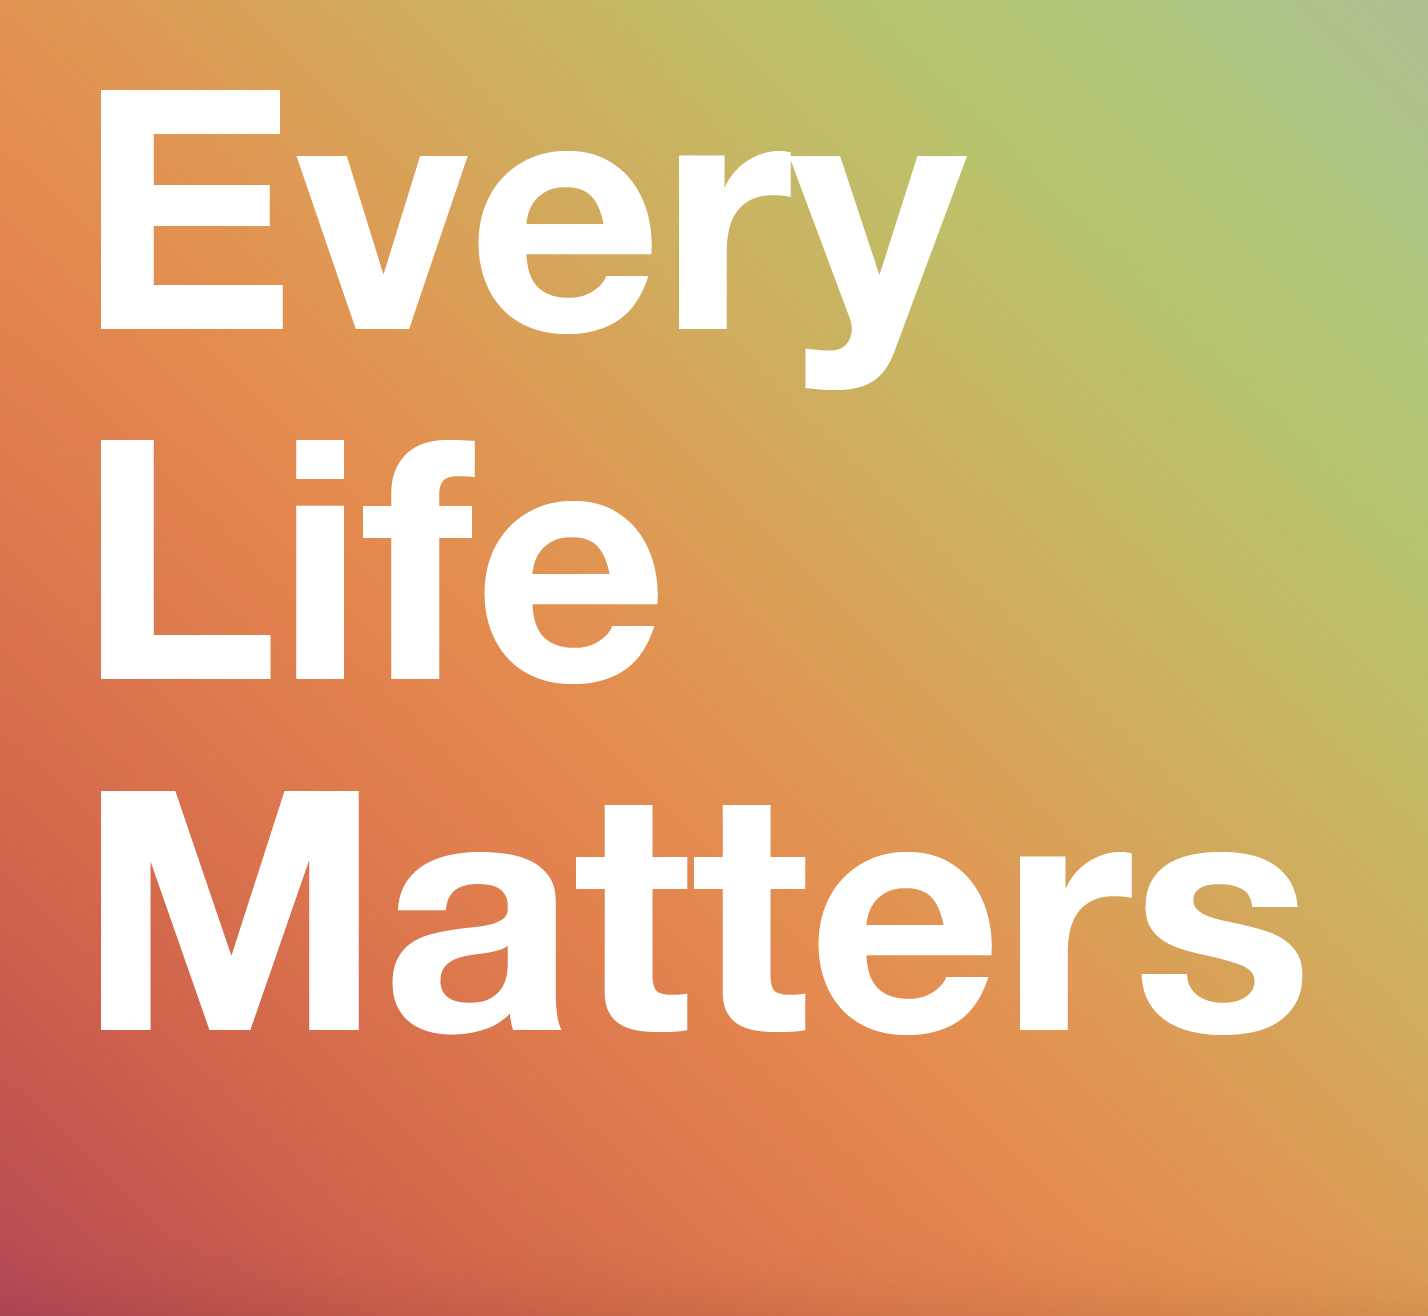 The text 'every life matters' in white, over a gradient background of red to green.